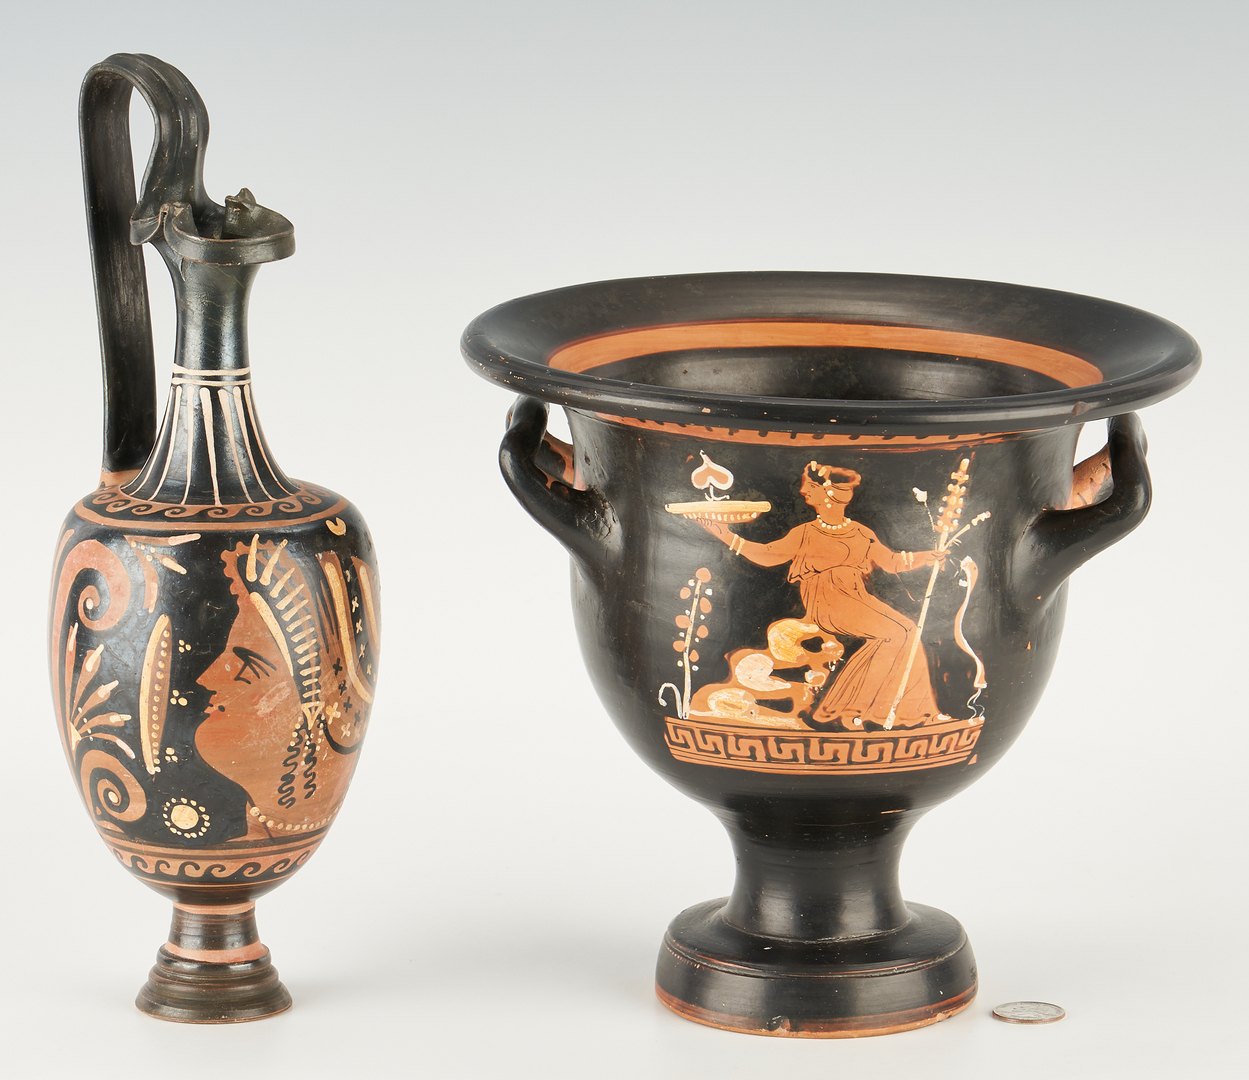 Lot 697: 2 Ancient Greek Red-Figure Pottery Vessels, ex-Royal Athena Galleries